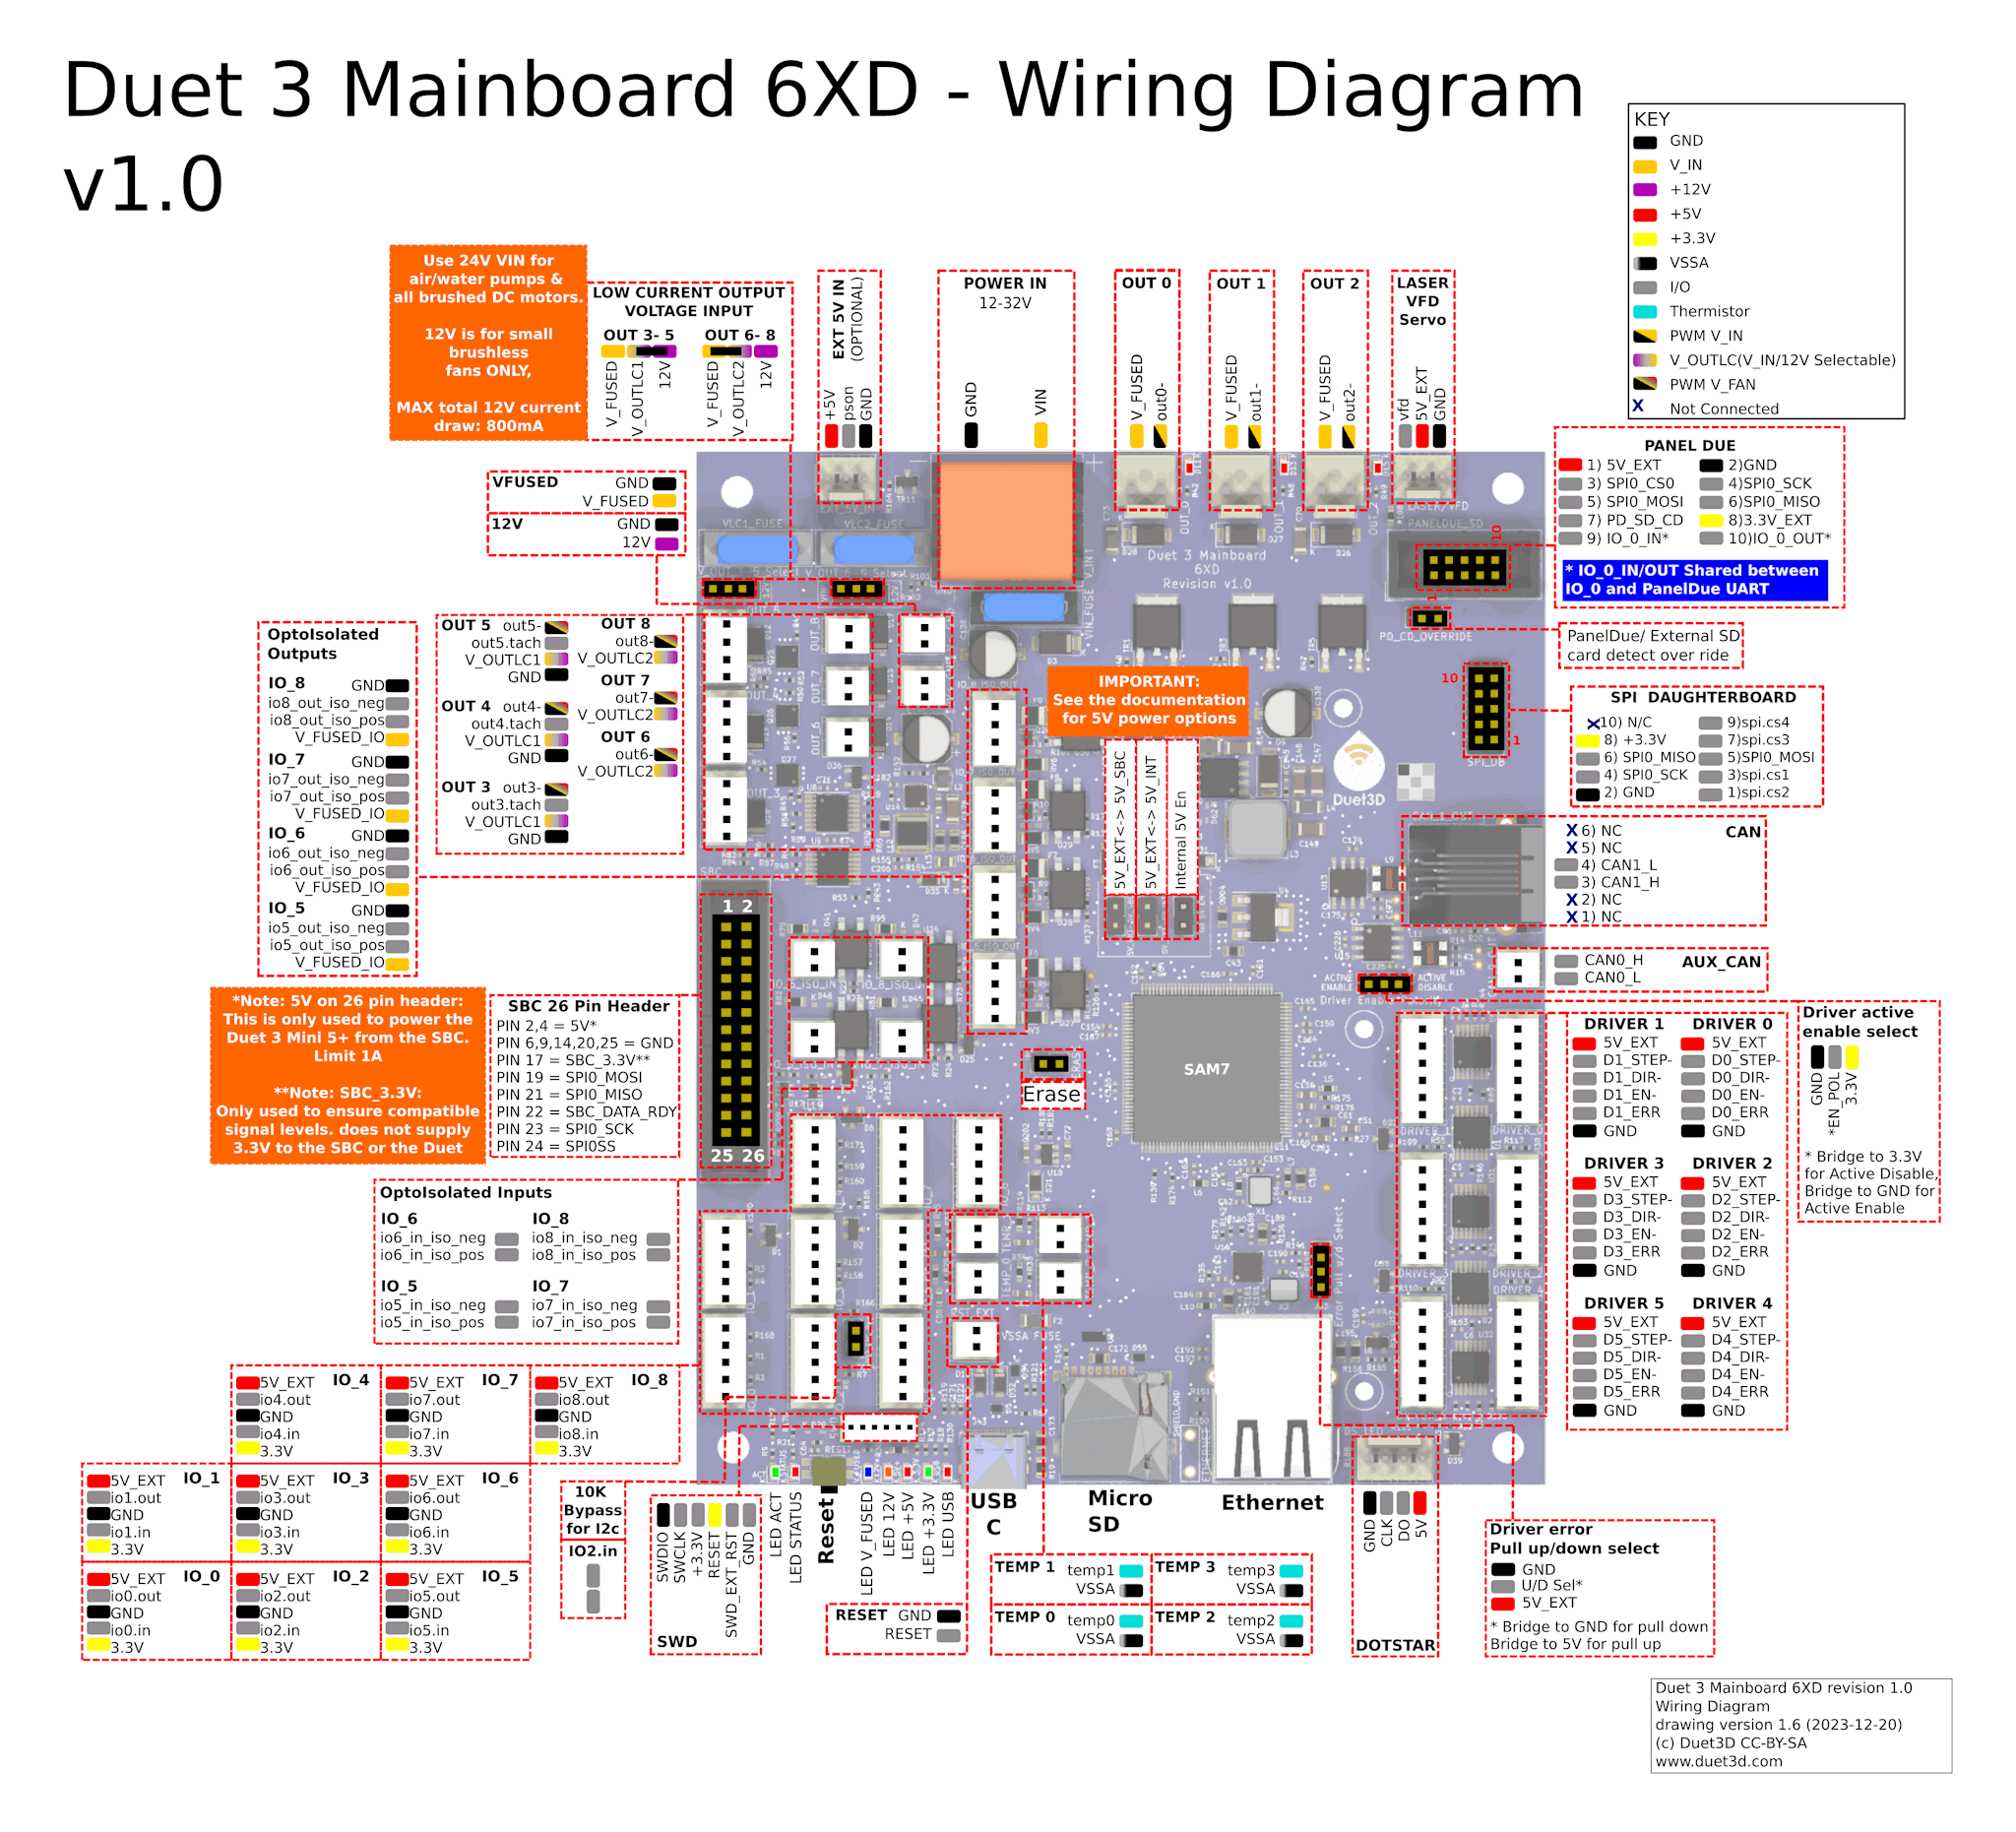 duet_3_mb6xd_wiring_latest.png